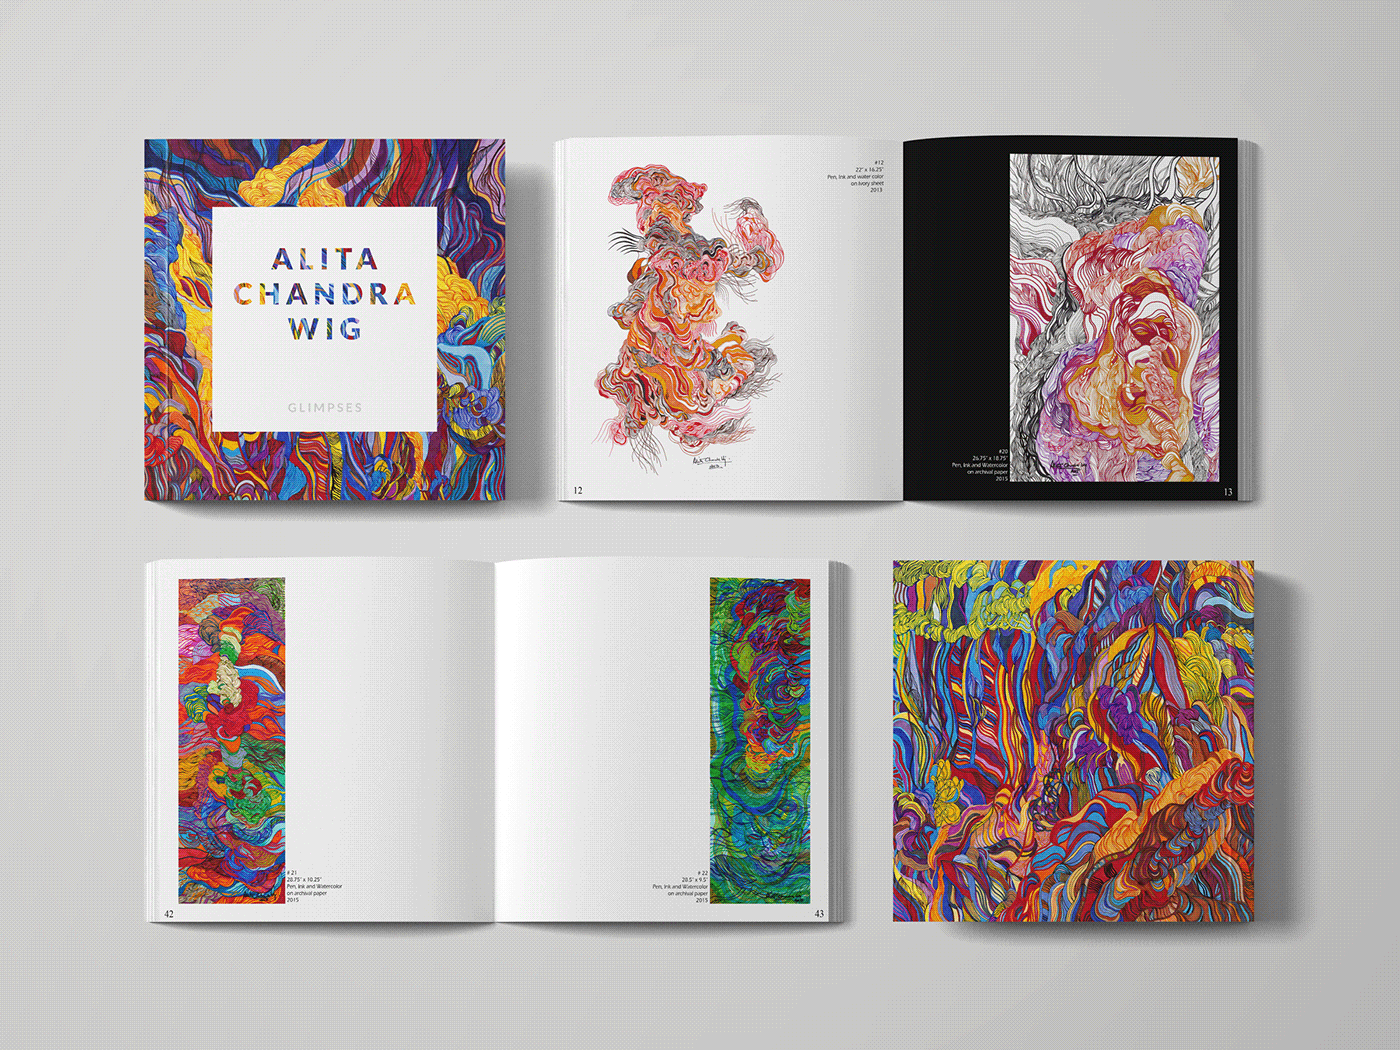 Catalog design for Alita Chandra Wig's art exhibition of abstract paintings